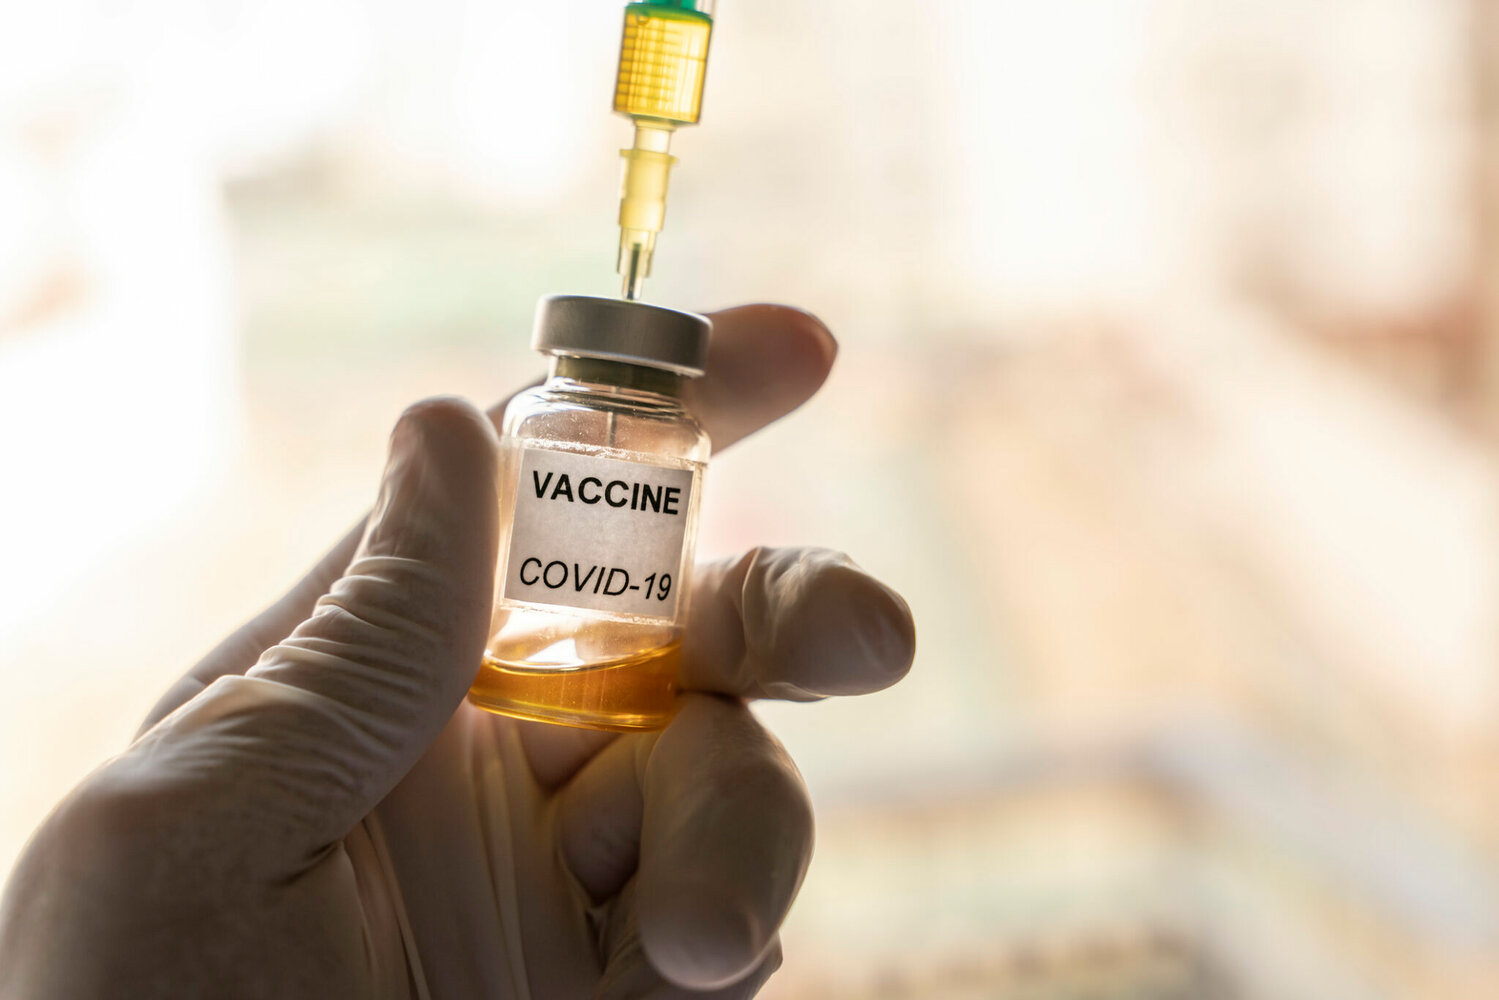 The Centers for Disease Control and Prevention has recommended Americans should get the updated COVID-19 vaccine.